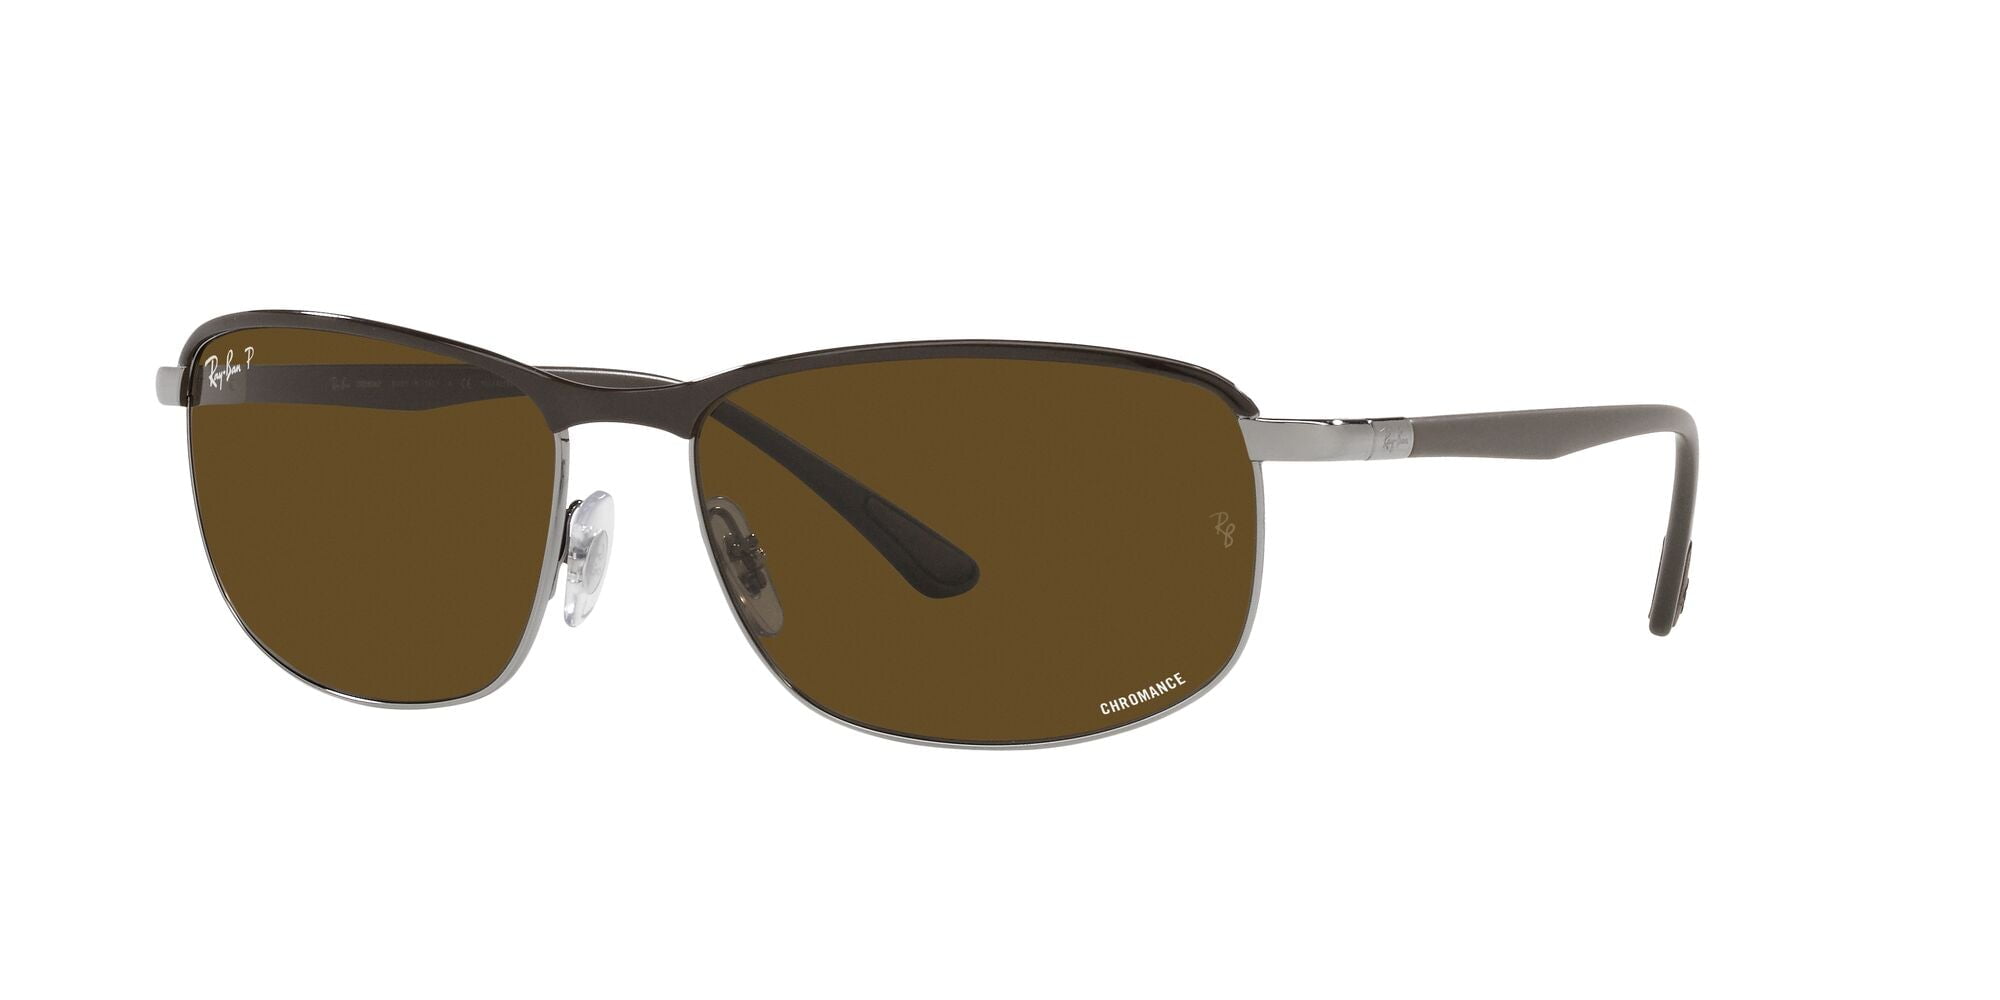 Ray-Ban sunglasses RB3671CH (9203AN) brown on gunmetal with polar brown  lenses, 60mm